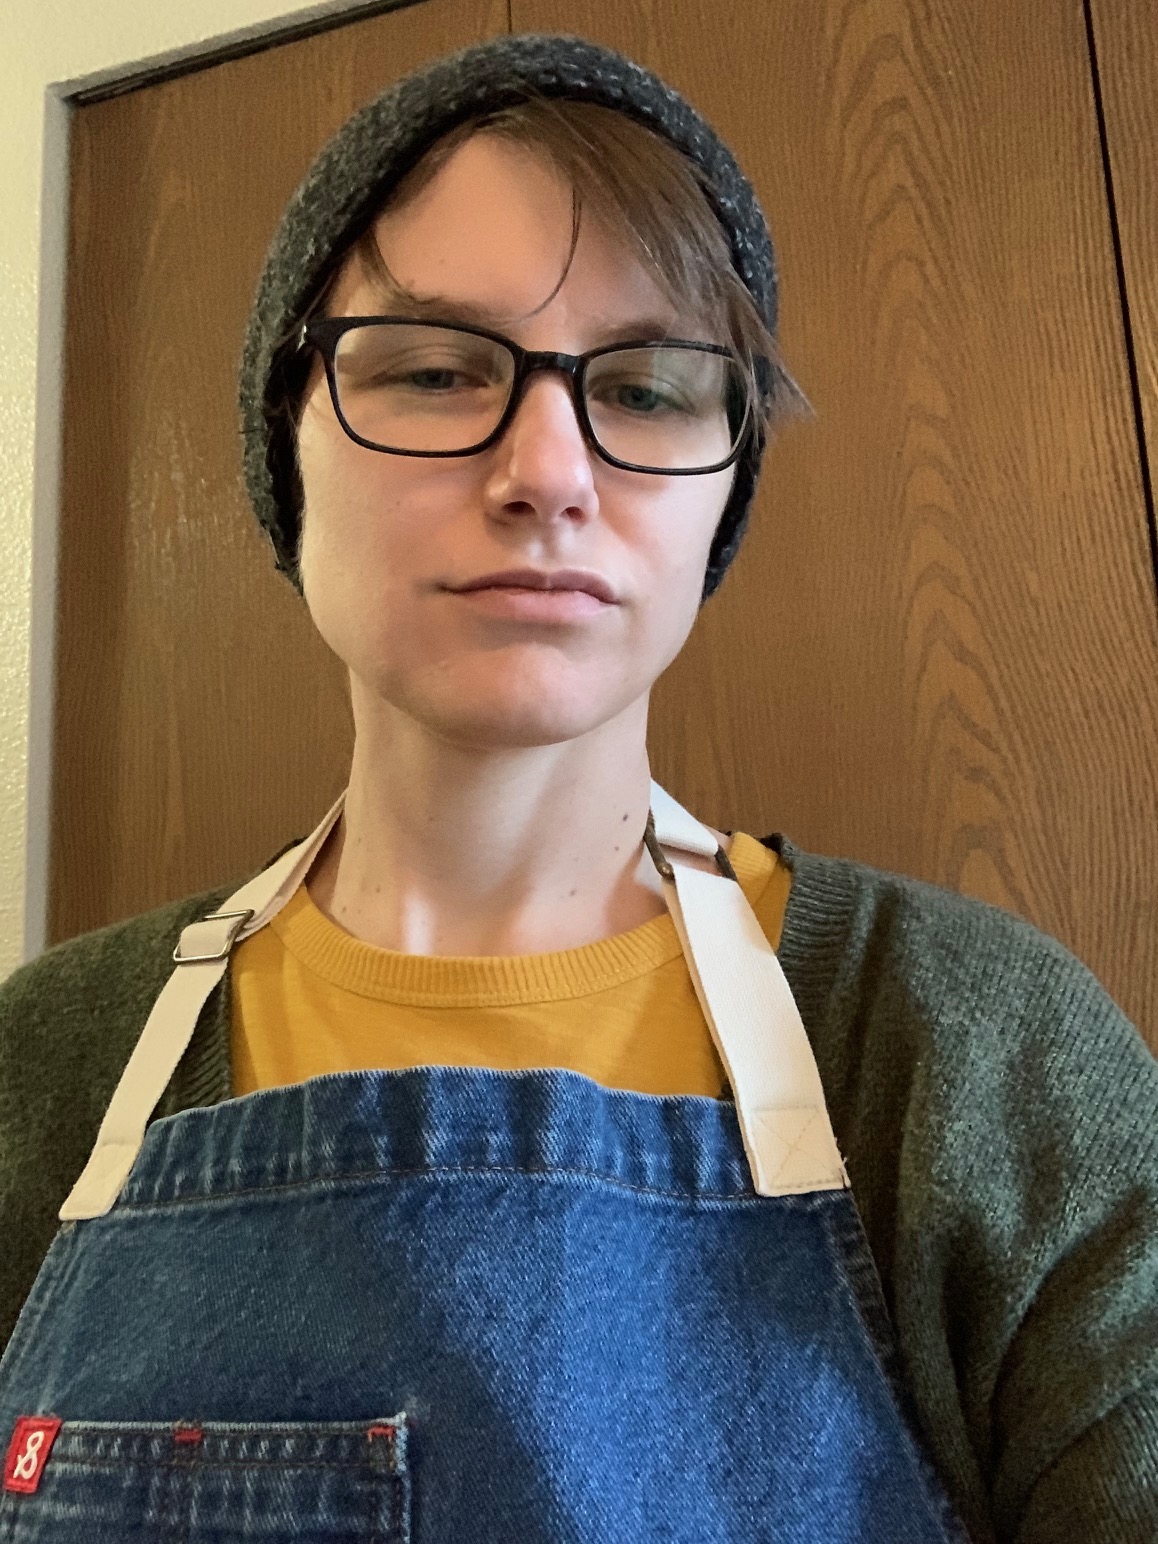 Laur Hawkins, a white person with short brown hair, rectangular glasses, and a knit beanie cap, shown from the shoulders up